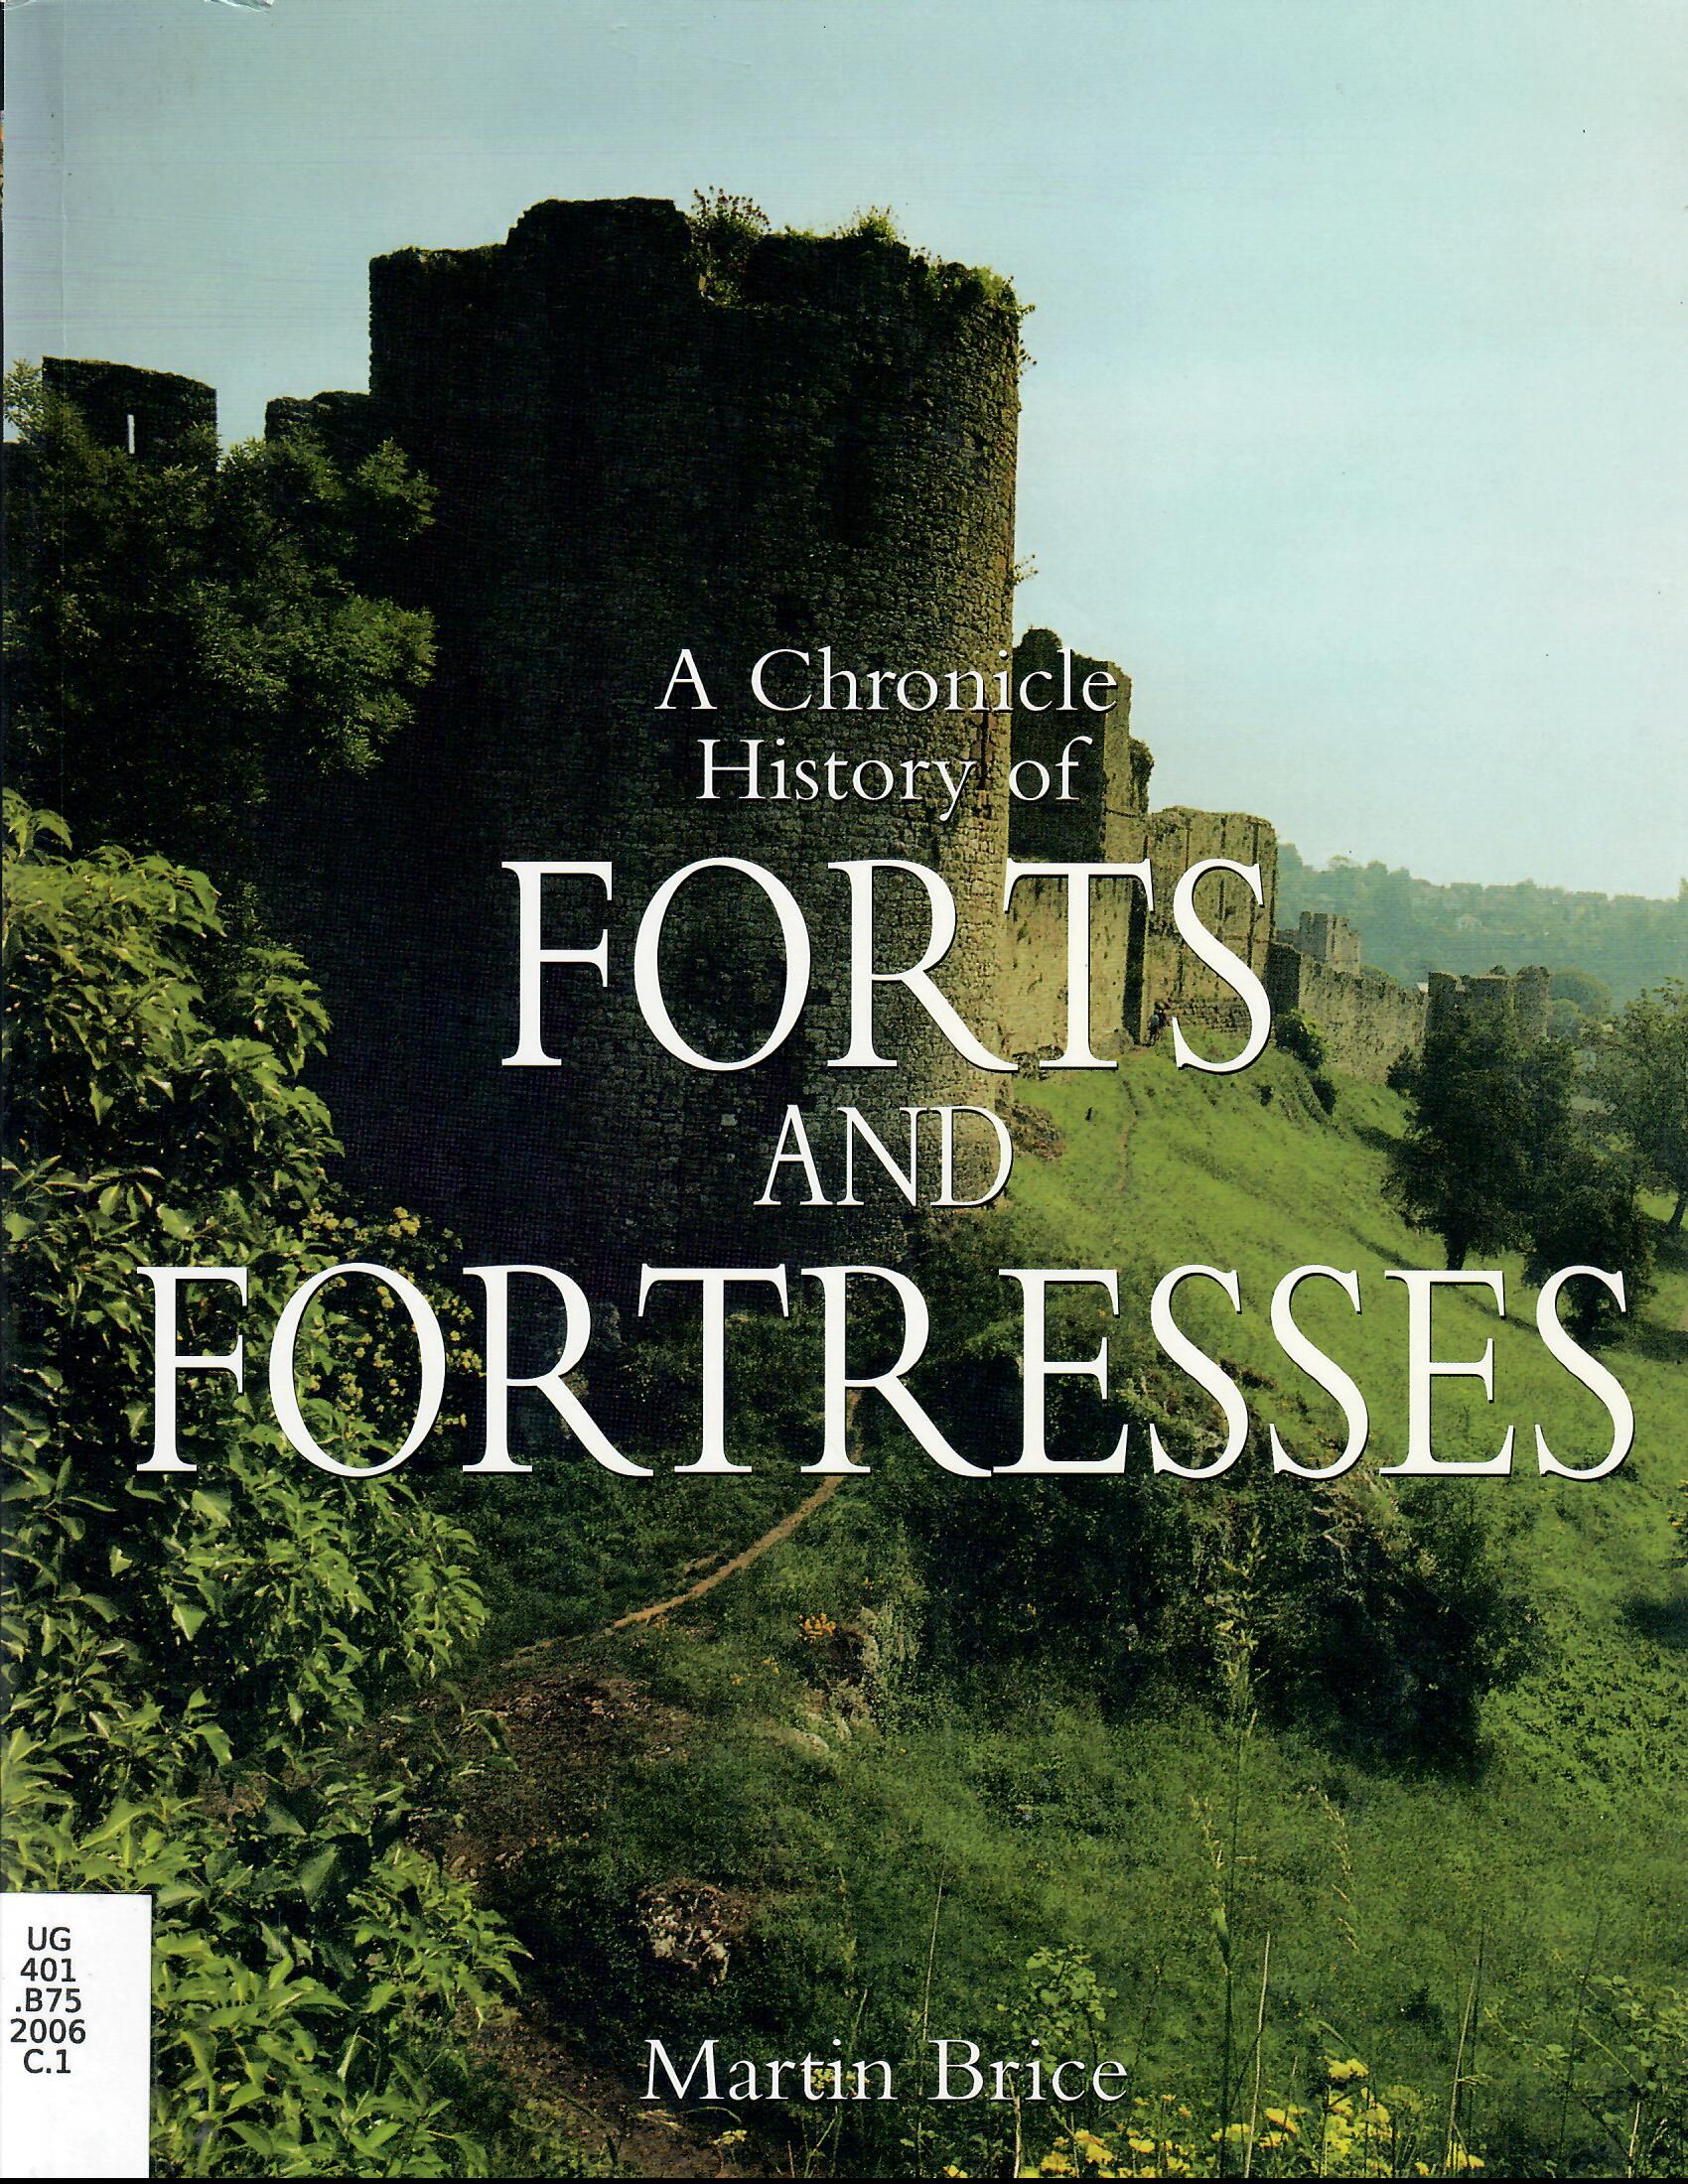 A Chronicle History of Forts and Fortresses